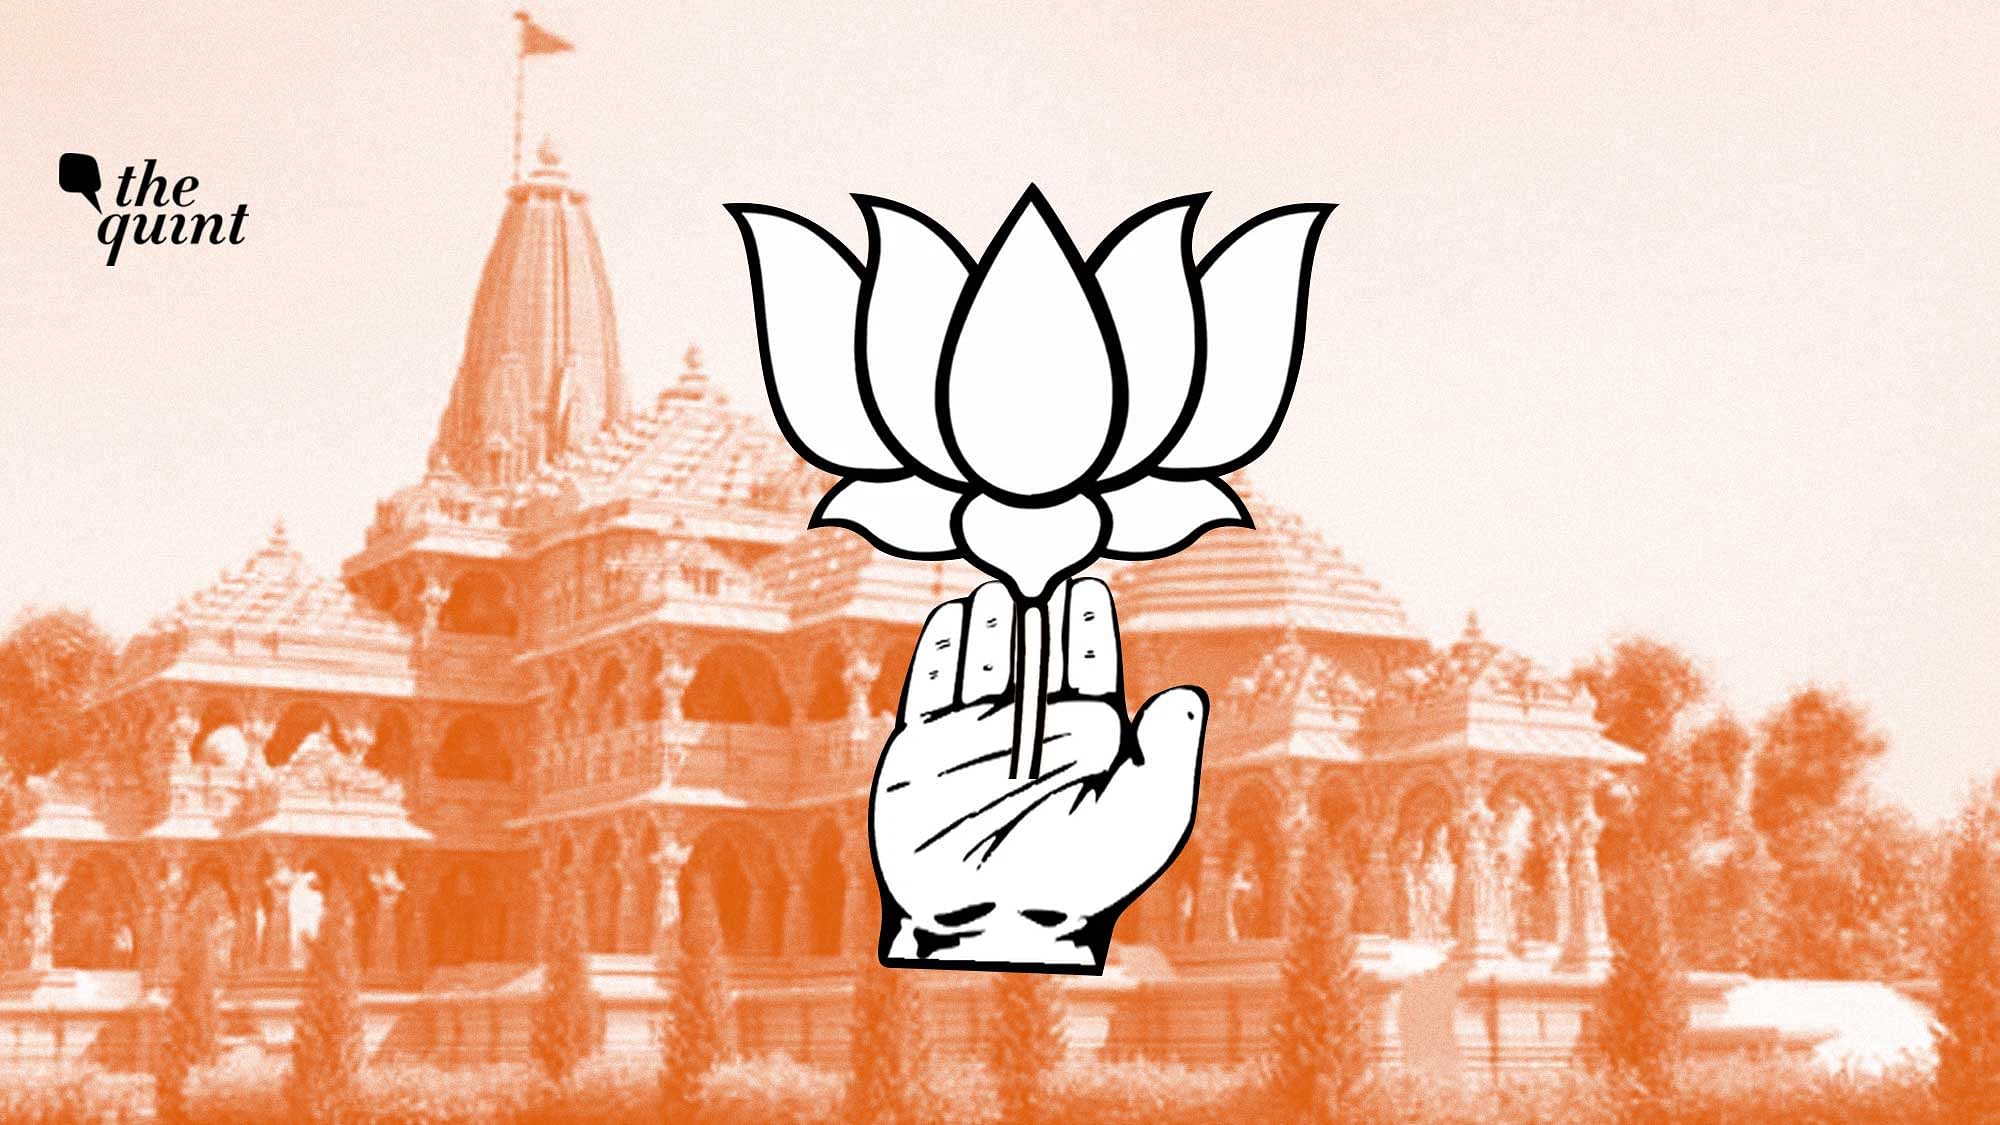 Ayodhya Janmabhoomi Ram Mandir And the Congress Party: What are its options?